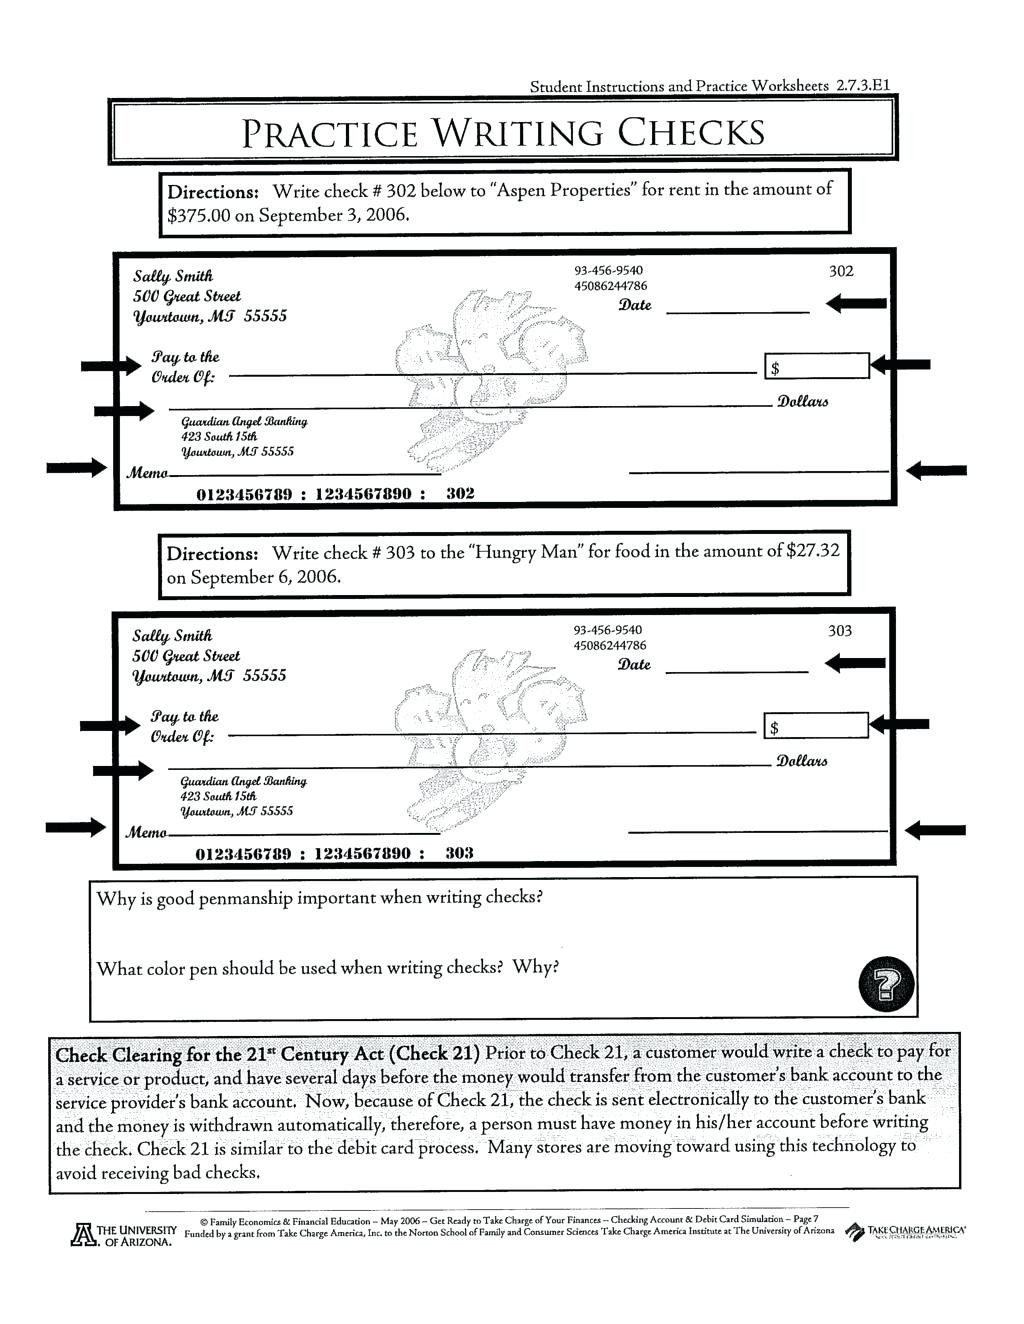 Check Writing Practice Worksheet Student Instructions And Practice Db 